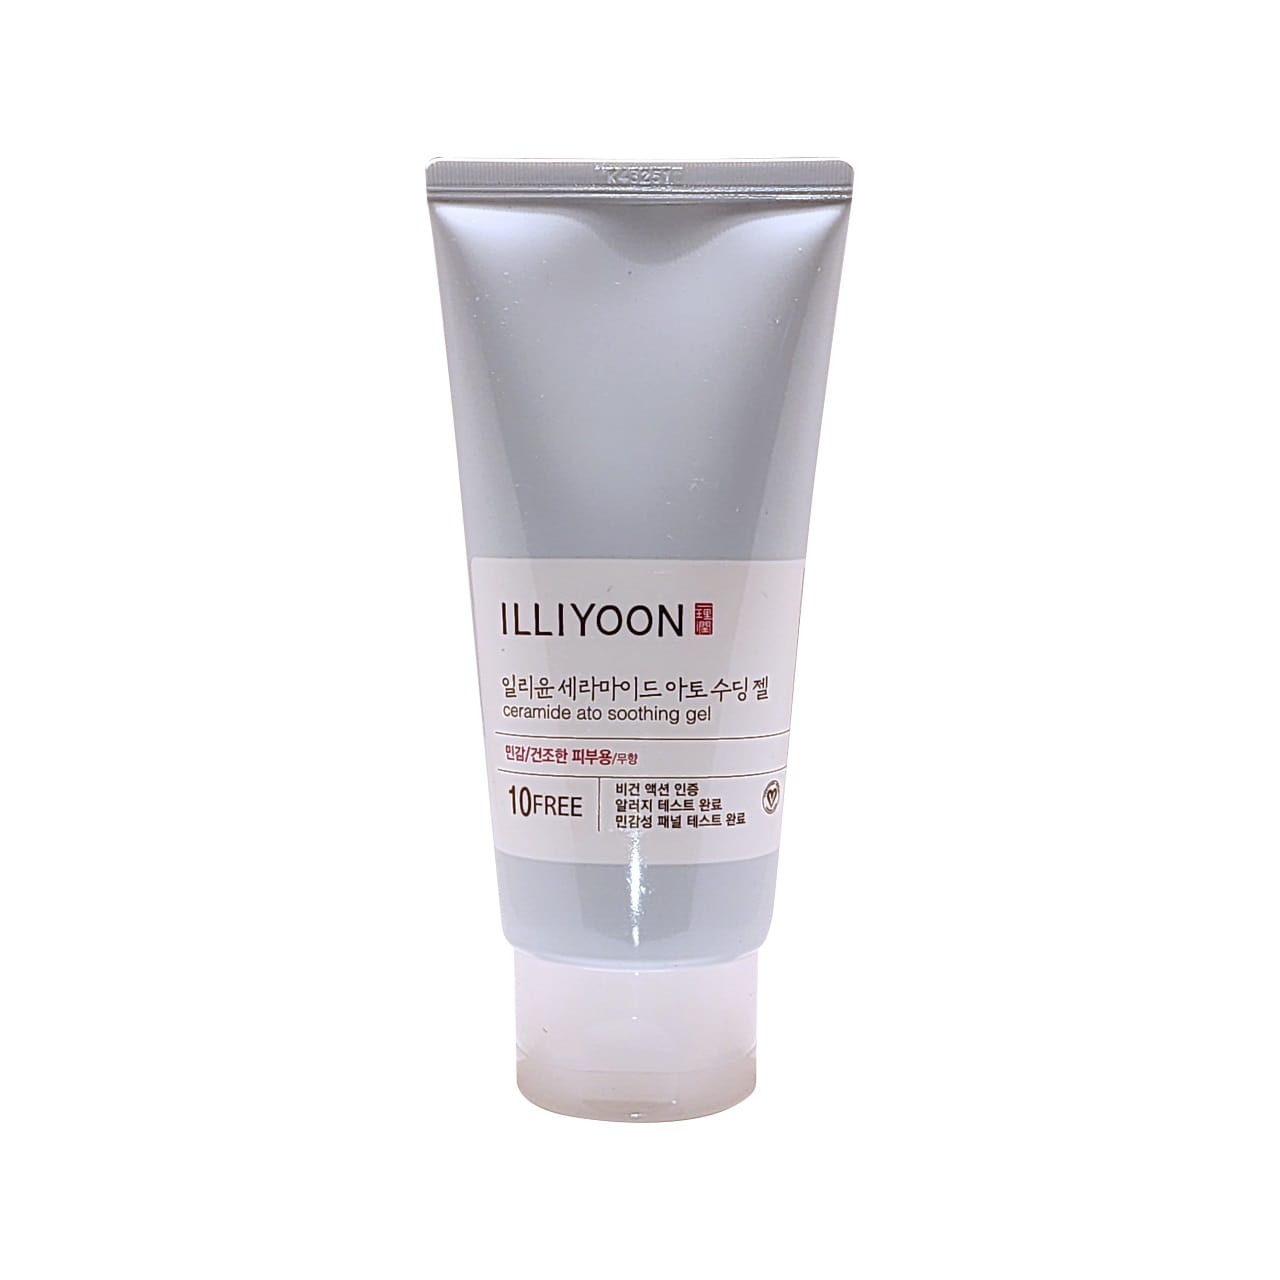 Product label for Illiyoon Ceramide Ato Soothing Gel (175 mL)